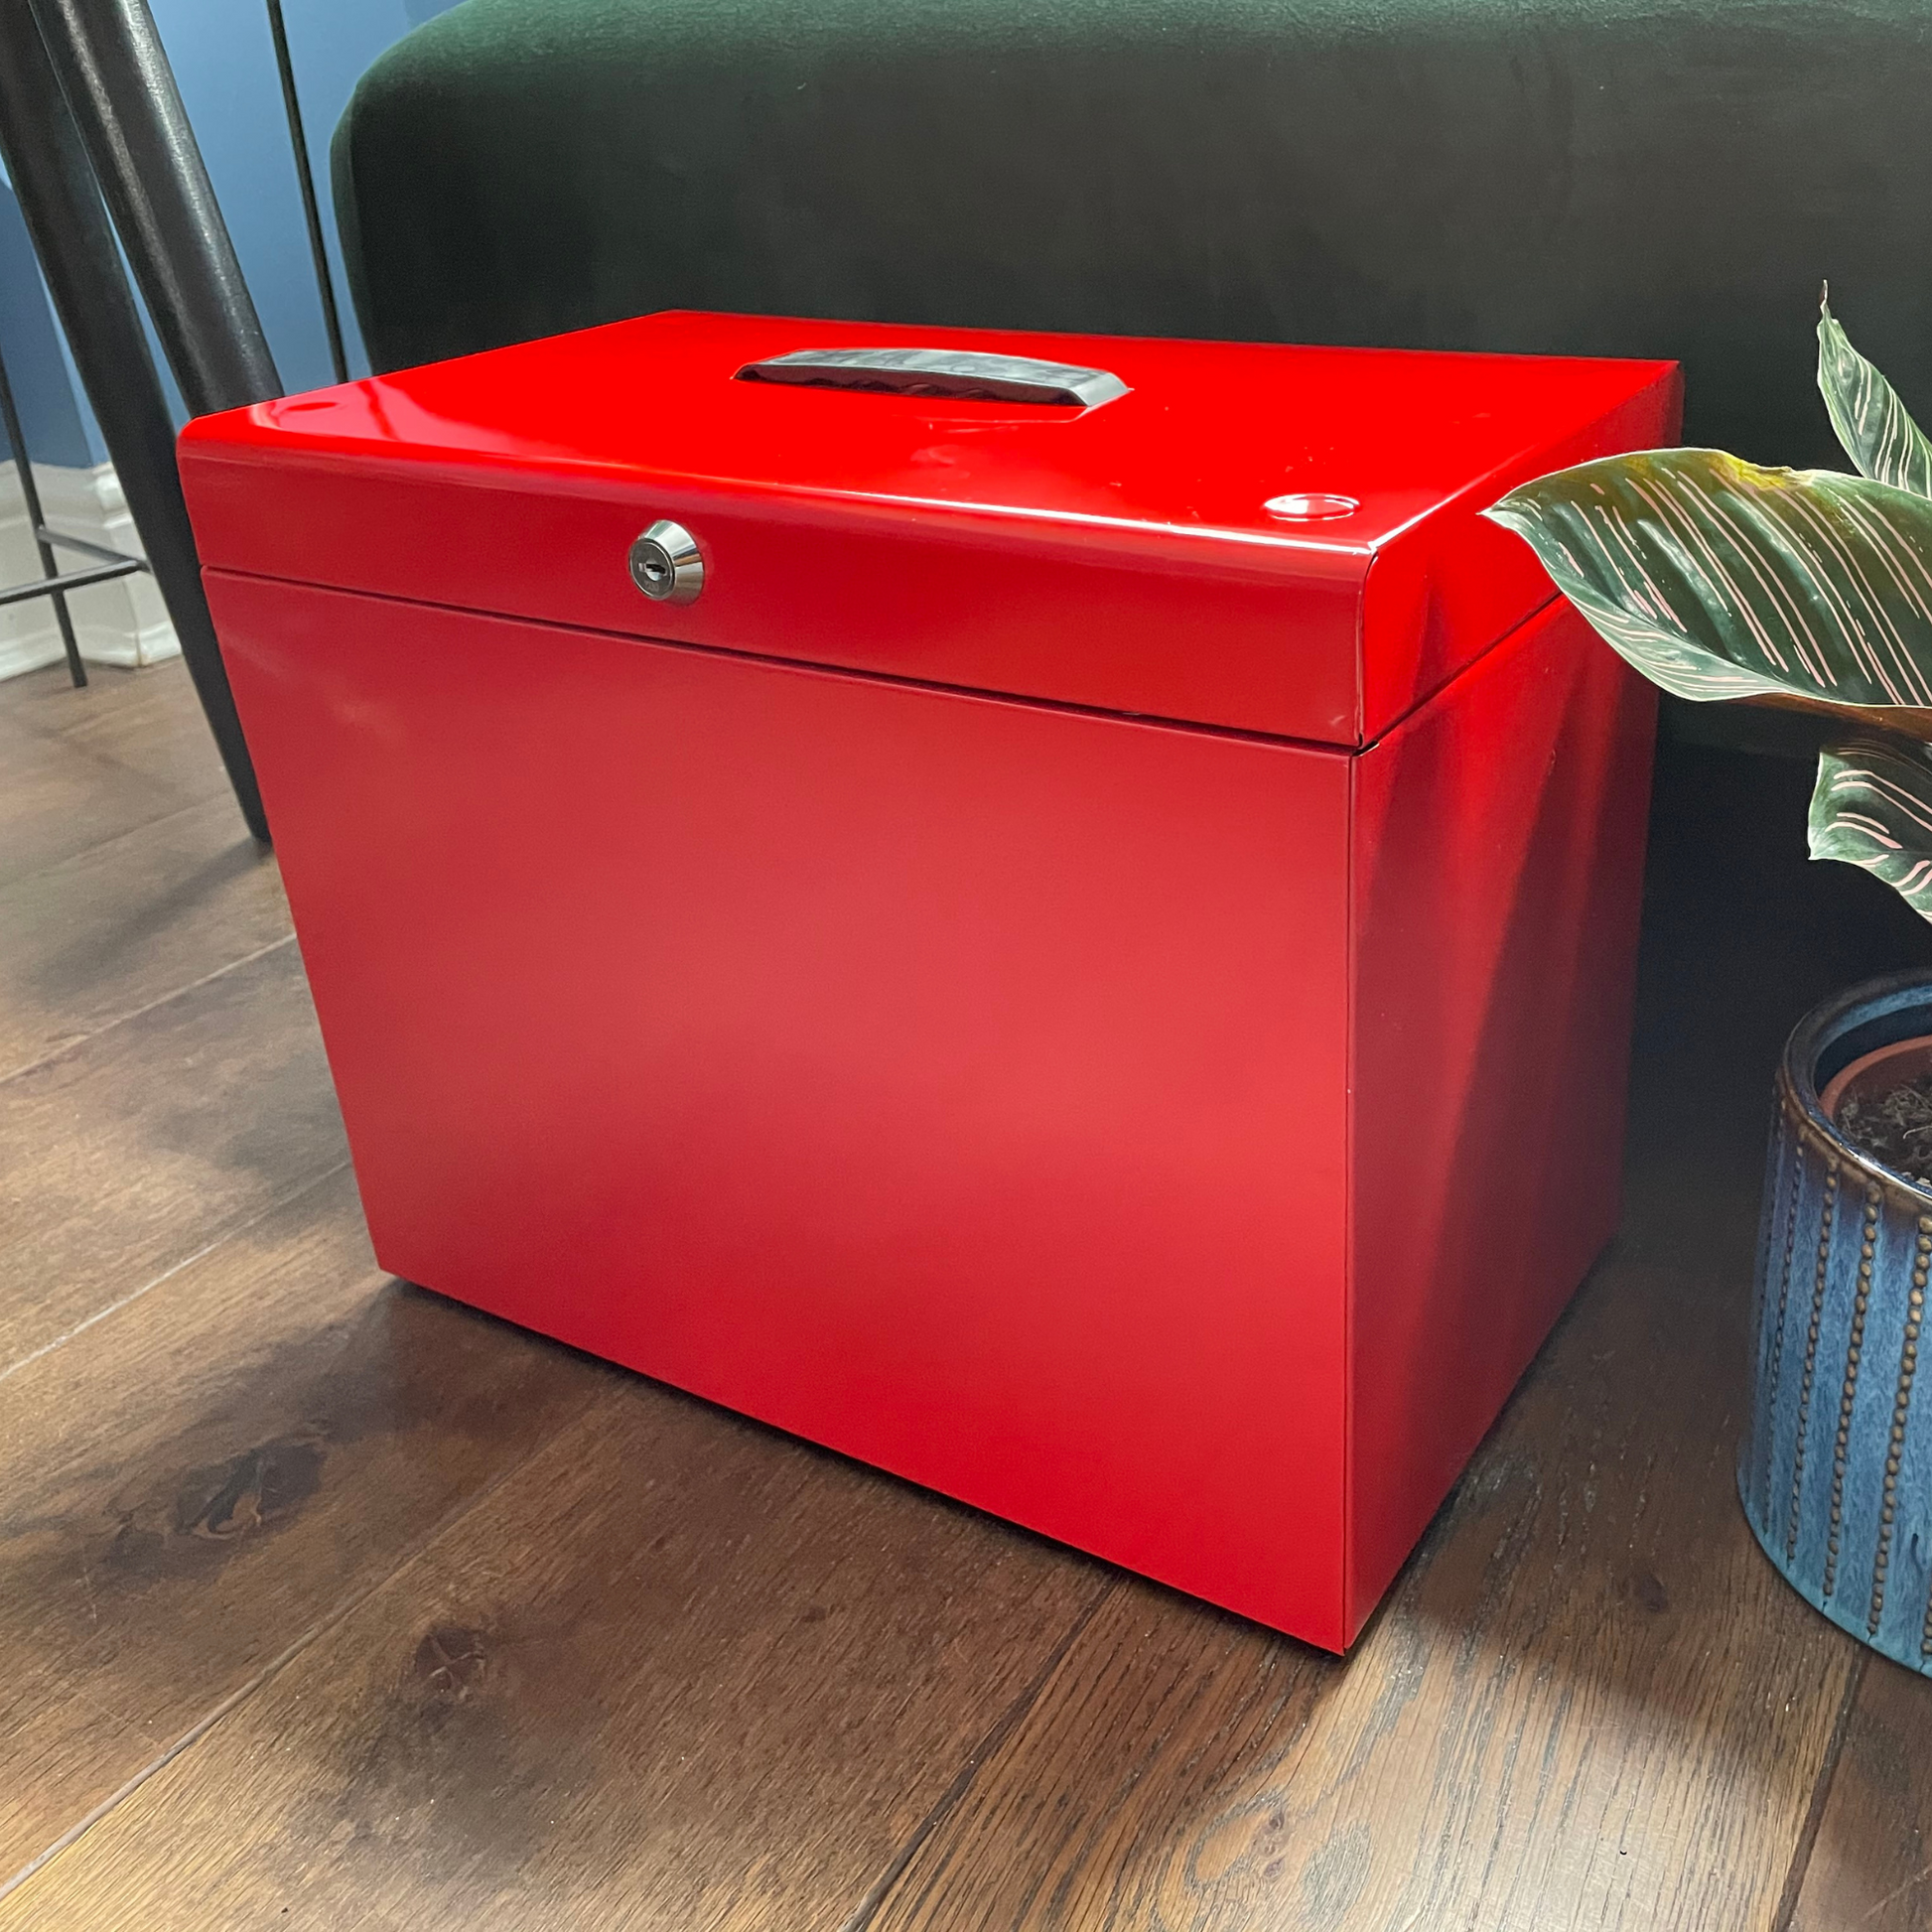 Glossy red A4 steel home file box placed on a wooden floor next to a potted plant, featuring a front lock and a top handle, with five suspension files included for home office organization.